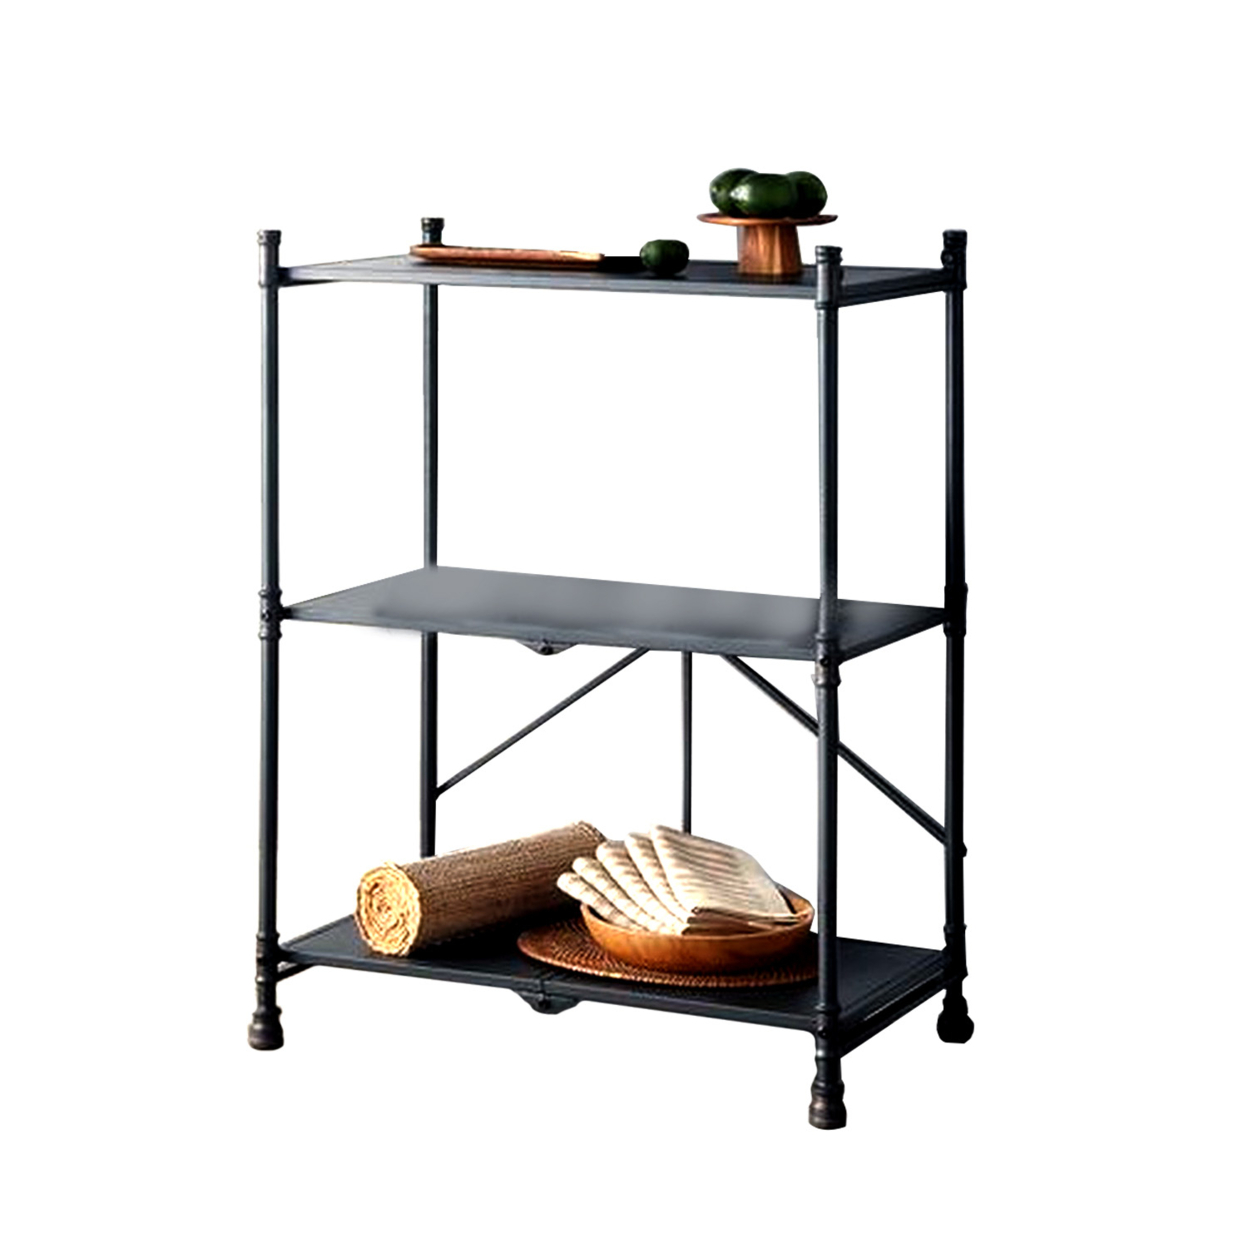 3 Tier Foldable Serving Cart With Pipe Style Frame, Gray- Saltoro Sherpi